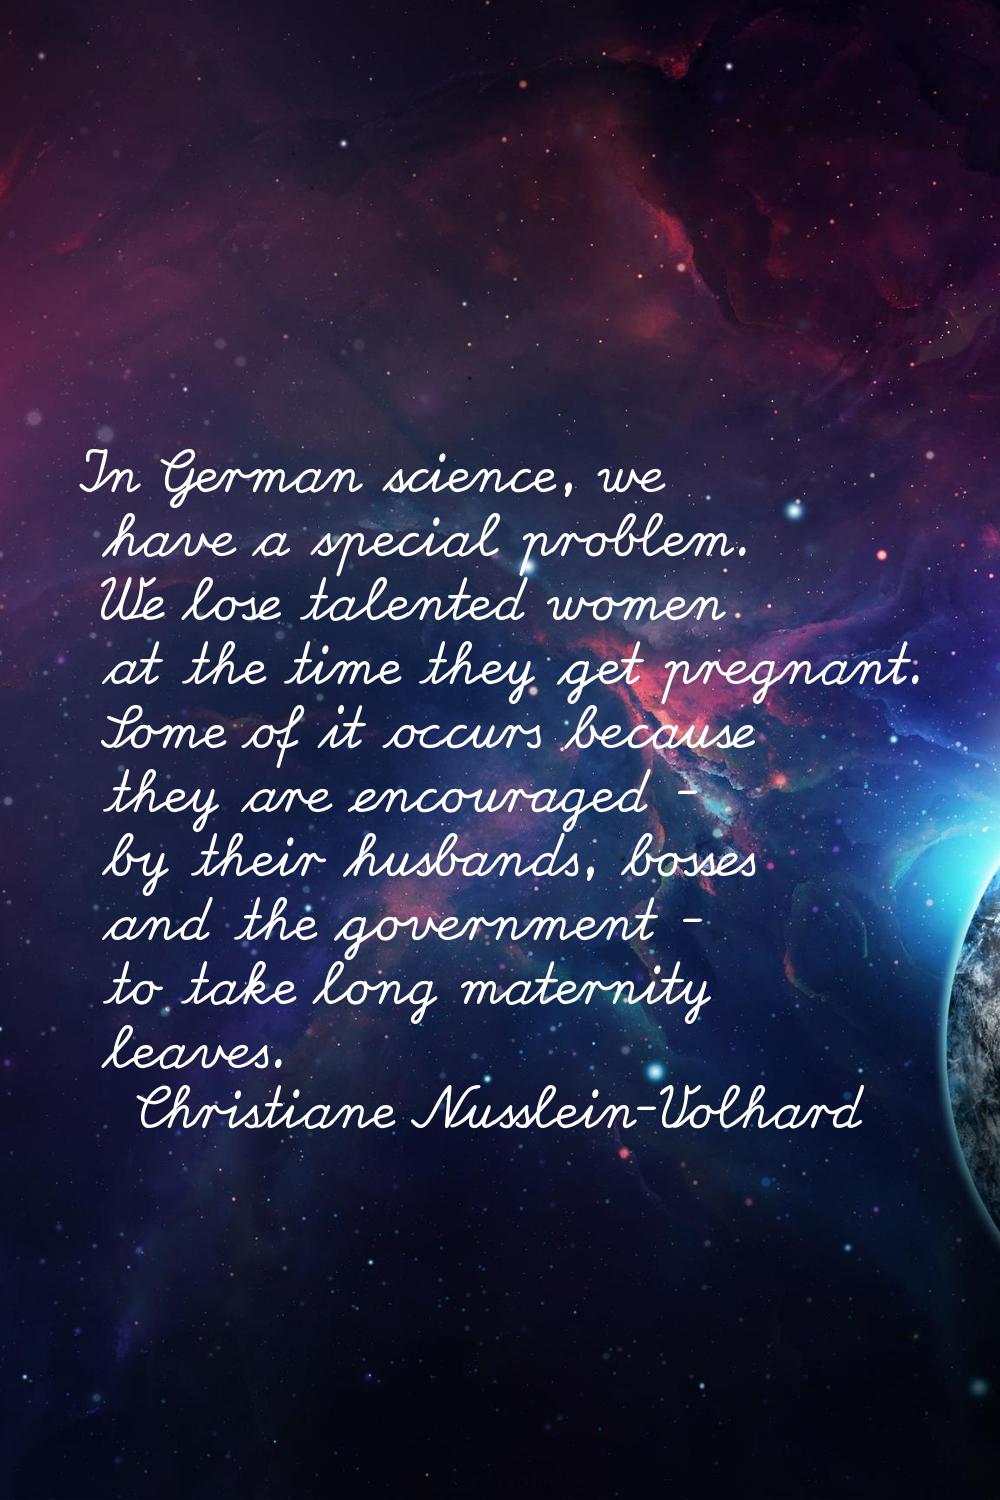 In German science, we have a special problem. We lose talented women at the time they get pregnant.